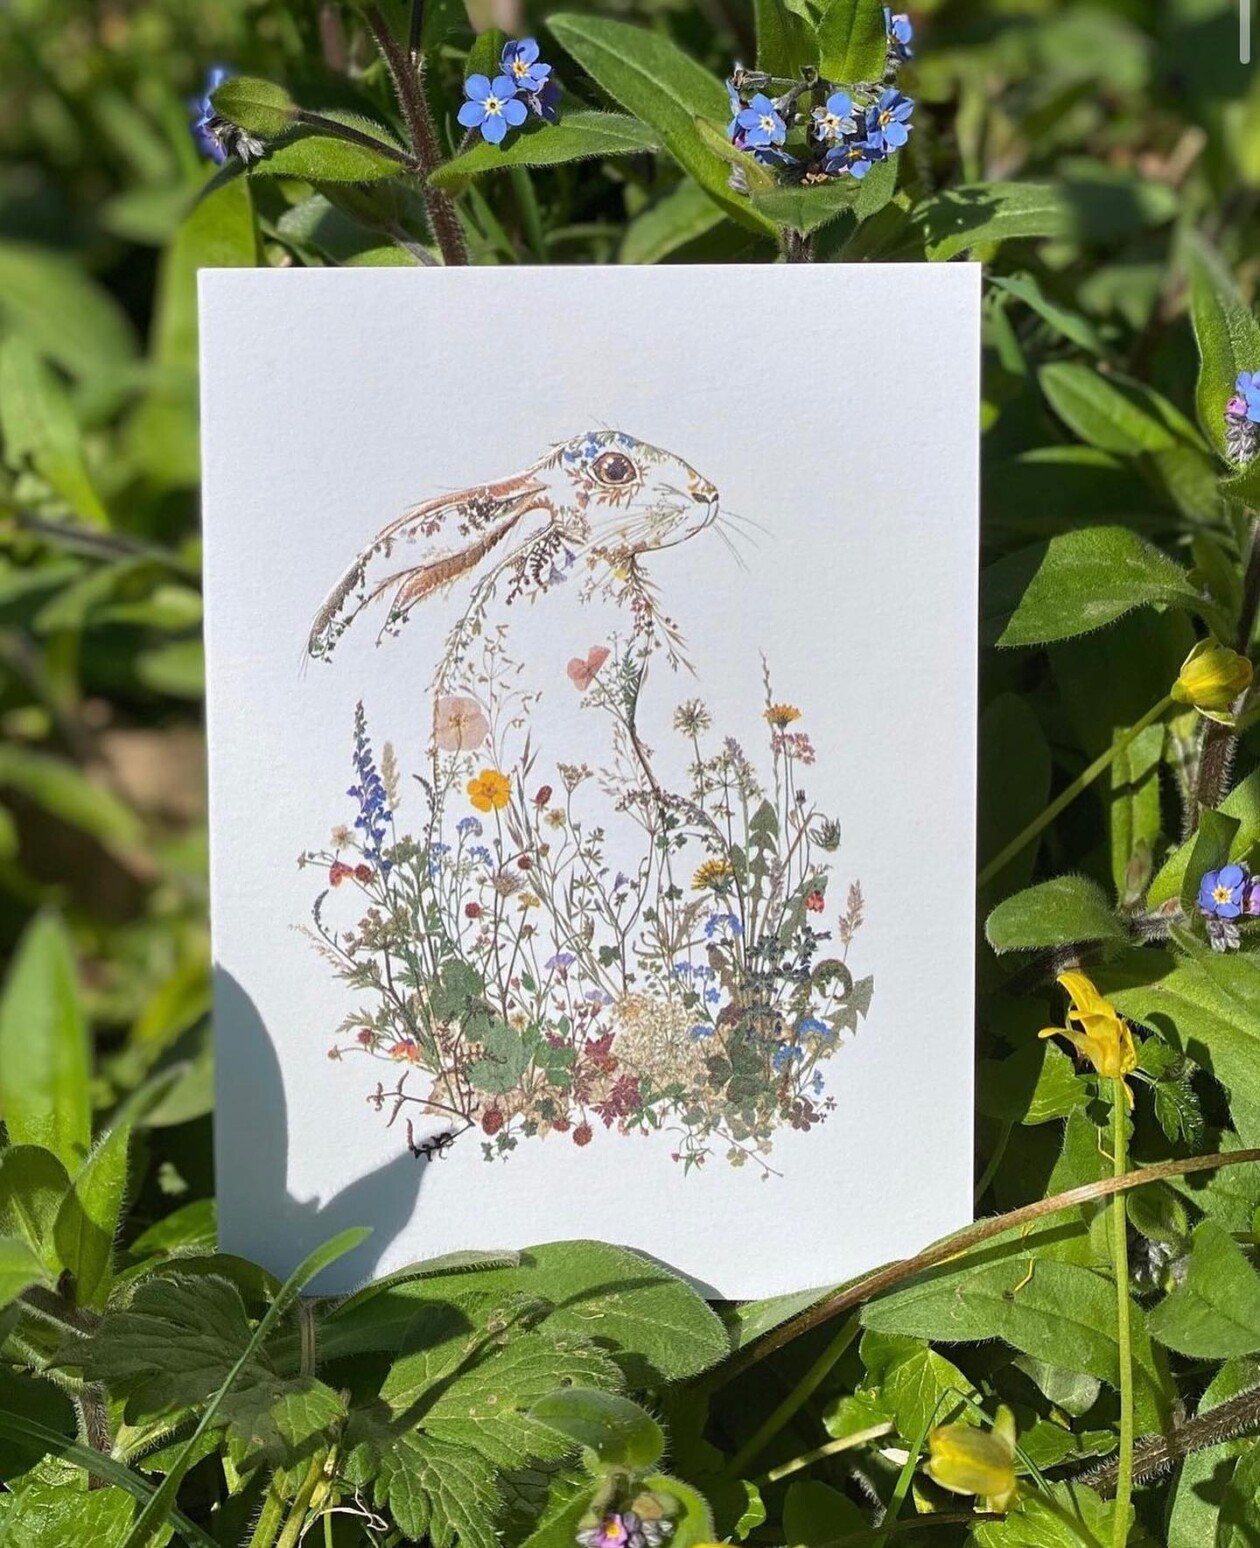 Illustrations Made Of Pressed Leaves And Flowers By Helen Ahpornsiri (15)